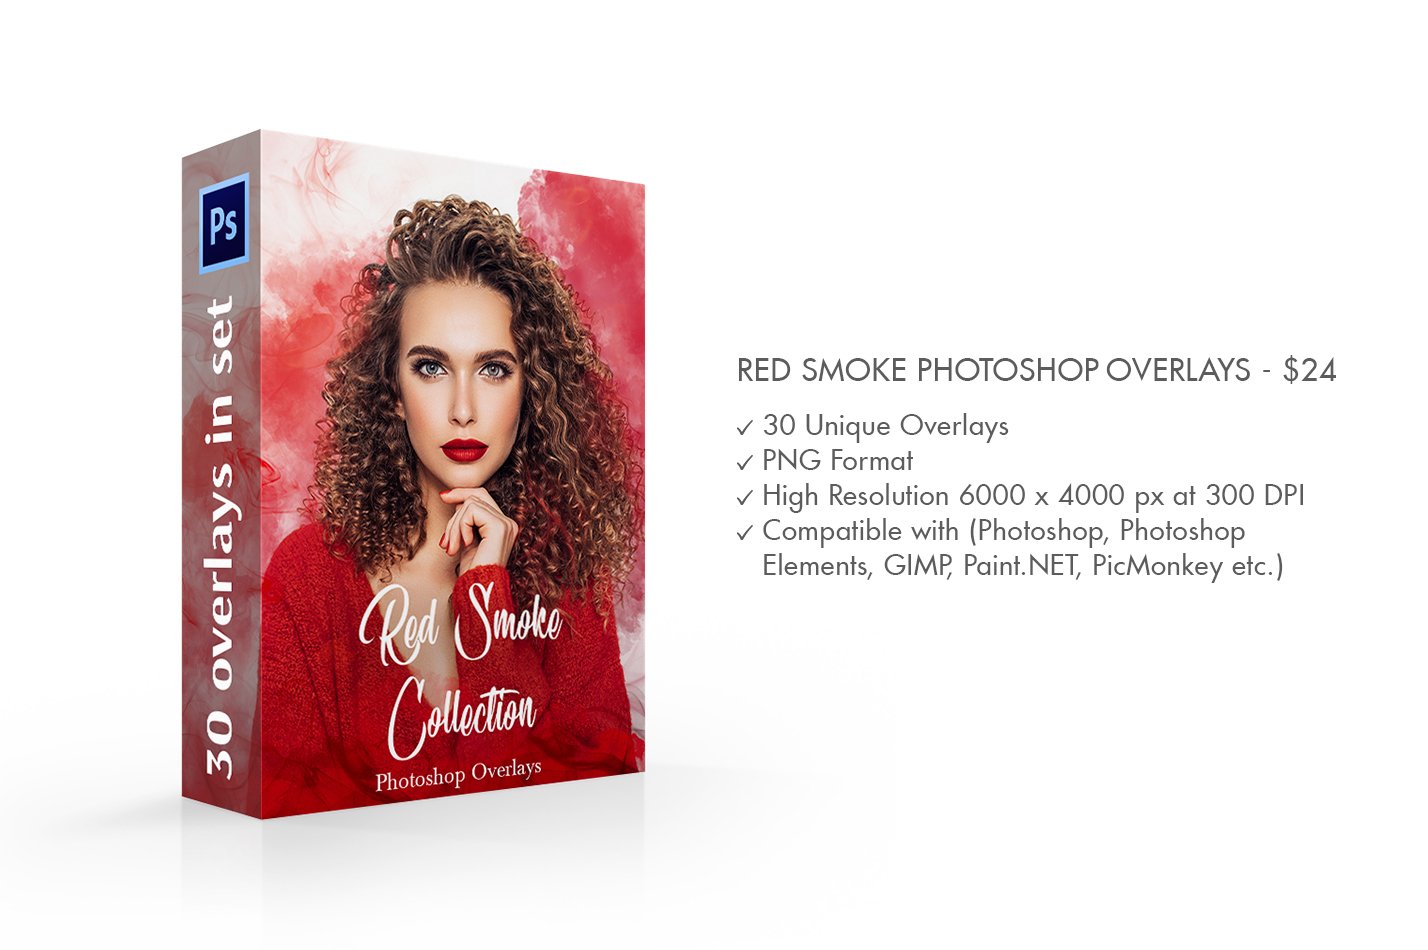 Red Smoke Photoshop Overlayspreview image.